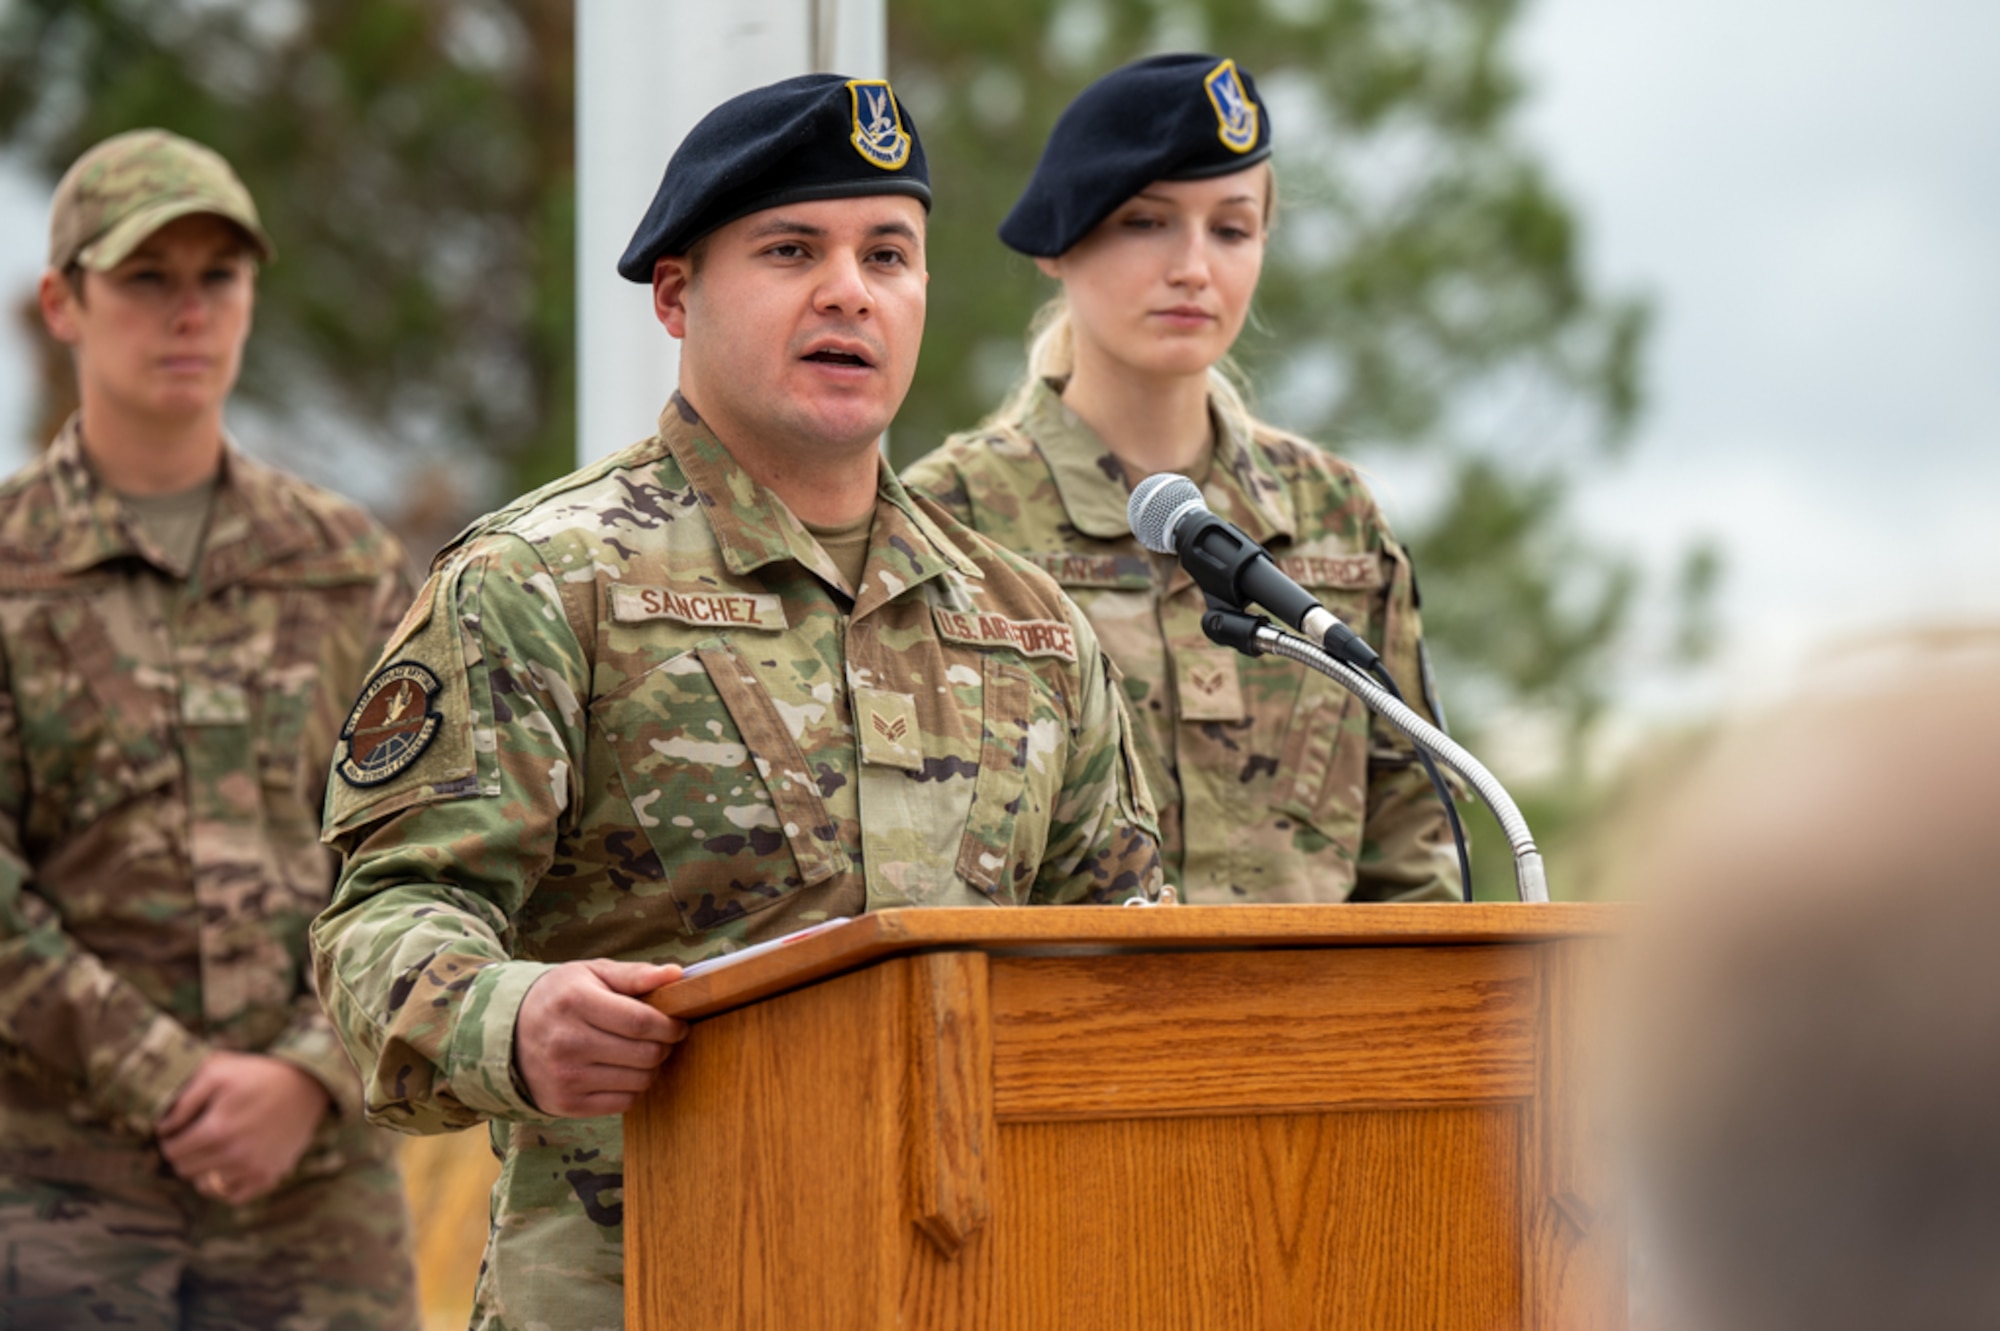 Members of a security forces squadron talk in front of a podium.